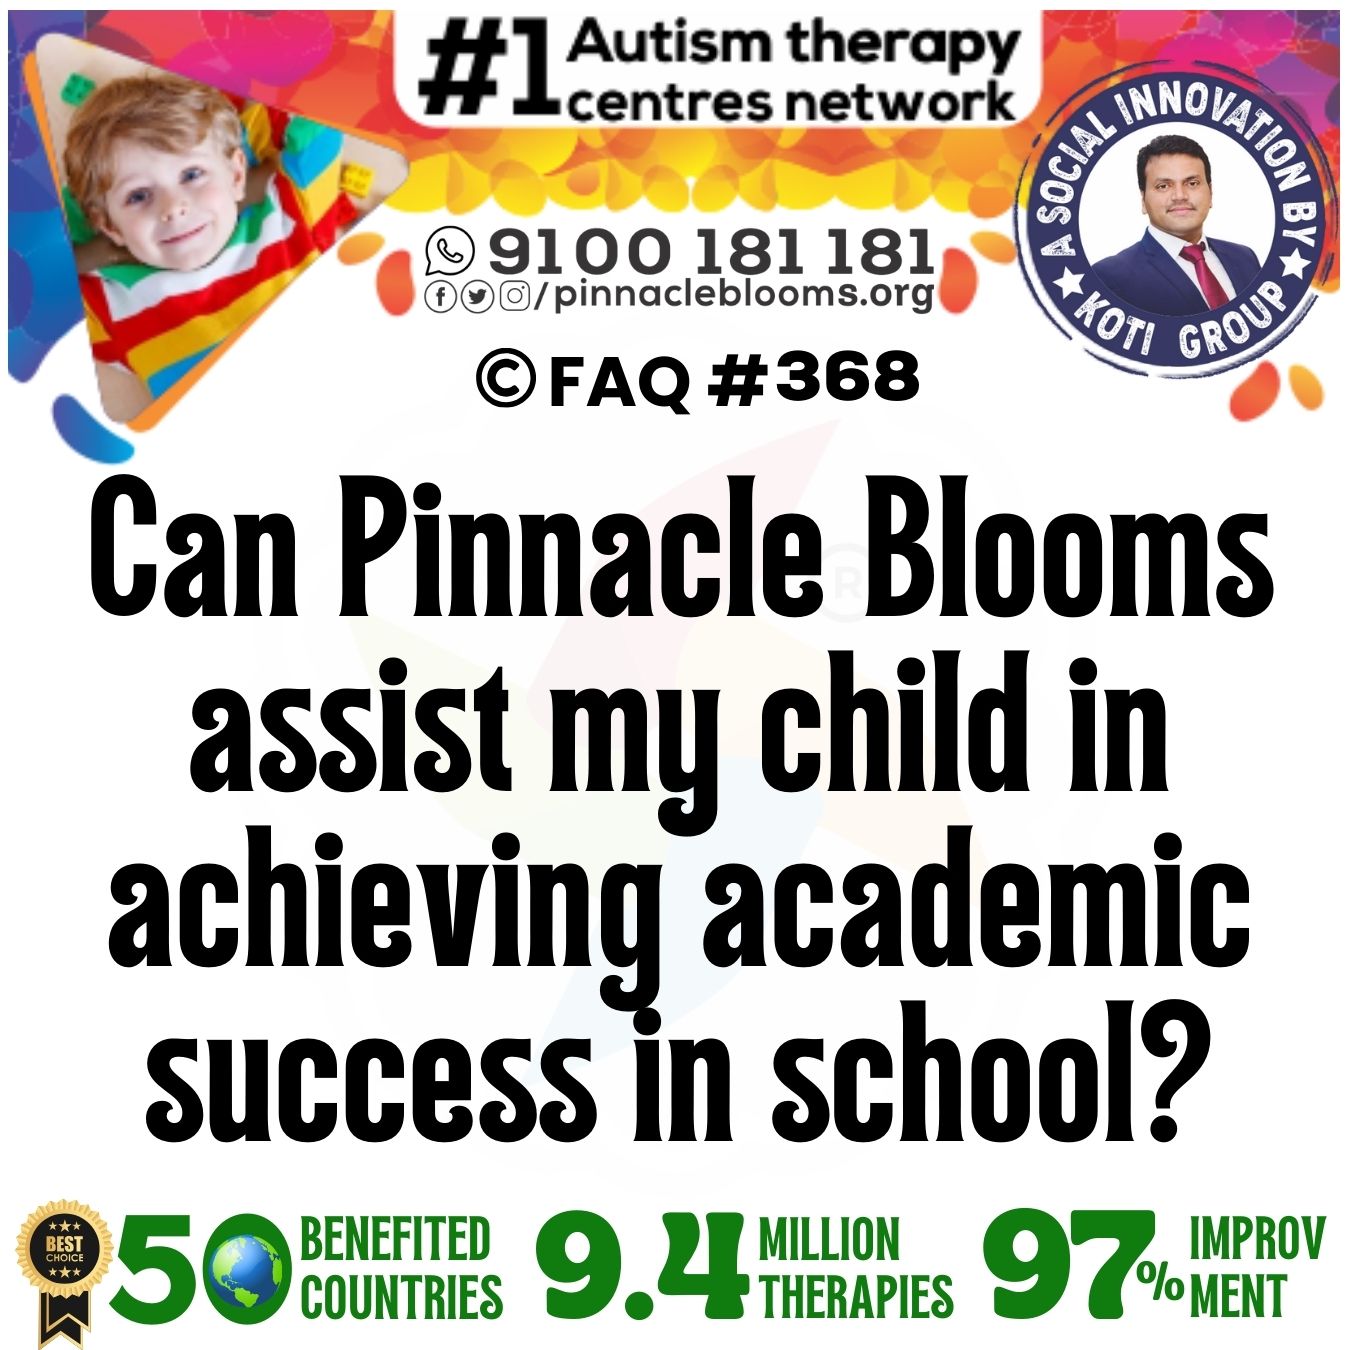 Can Pinnacle Blooms assist my child in achieving academic success in school?